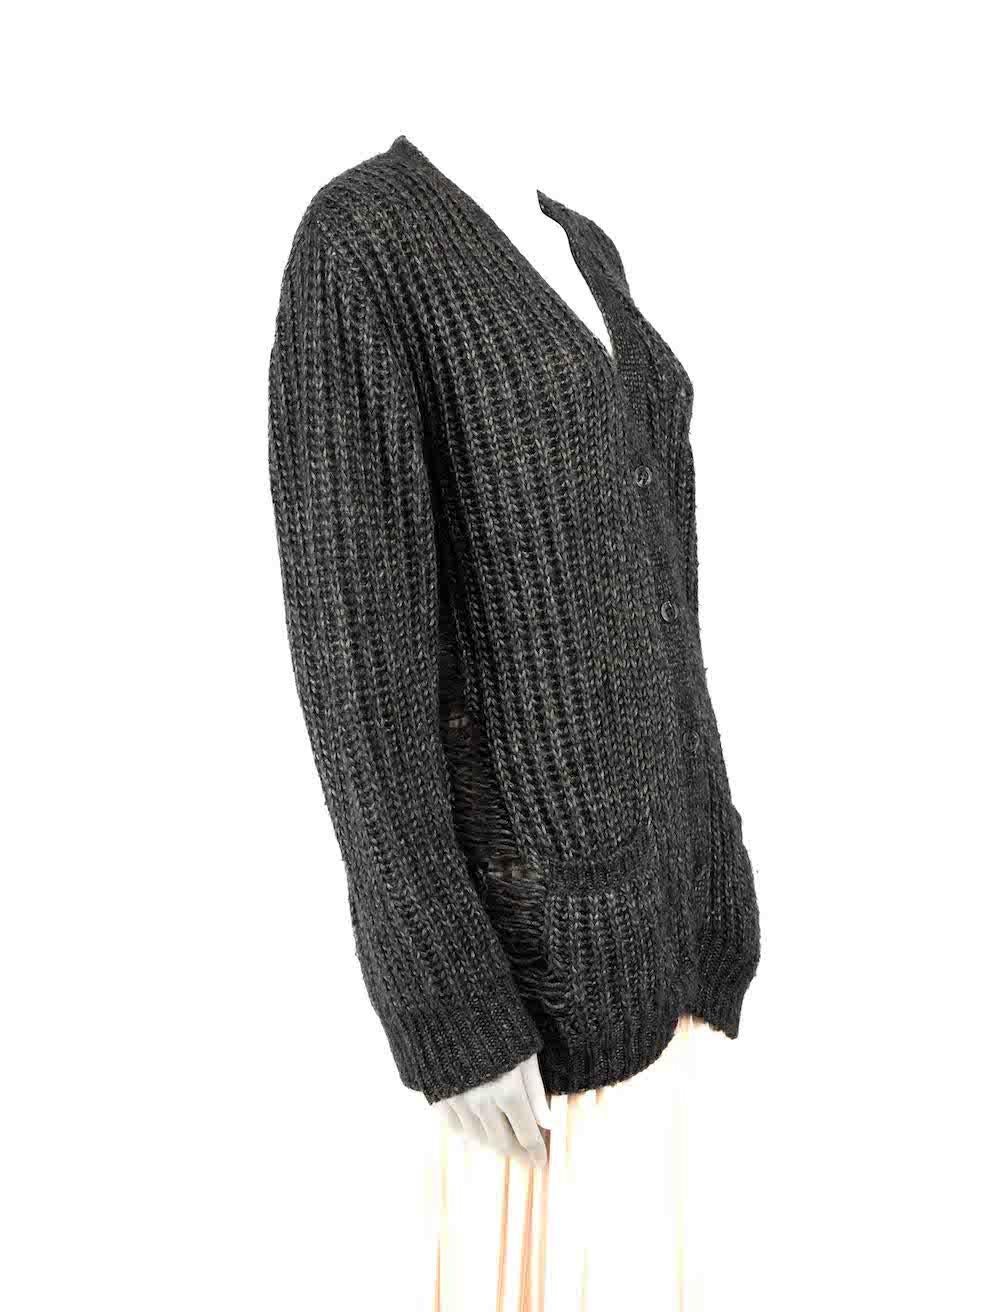 CONDITION is Very good. Minimal wear to cardigan is evident. Minimal wear to the overall texture with very light pilling to the knit on this used Saint Laurent designer resale item.
 
 
 
 Details
 
 
 Grey
 
 Polyester
 
 Knit cardigan
 
